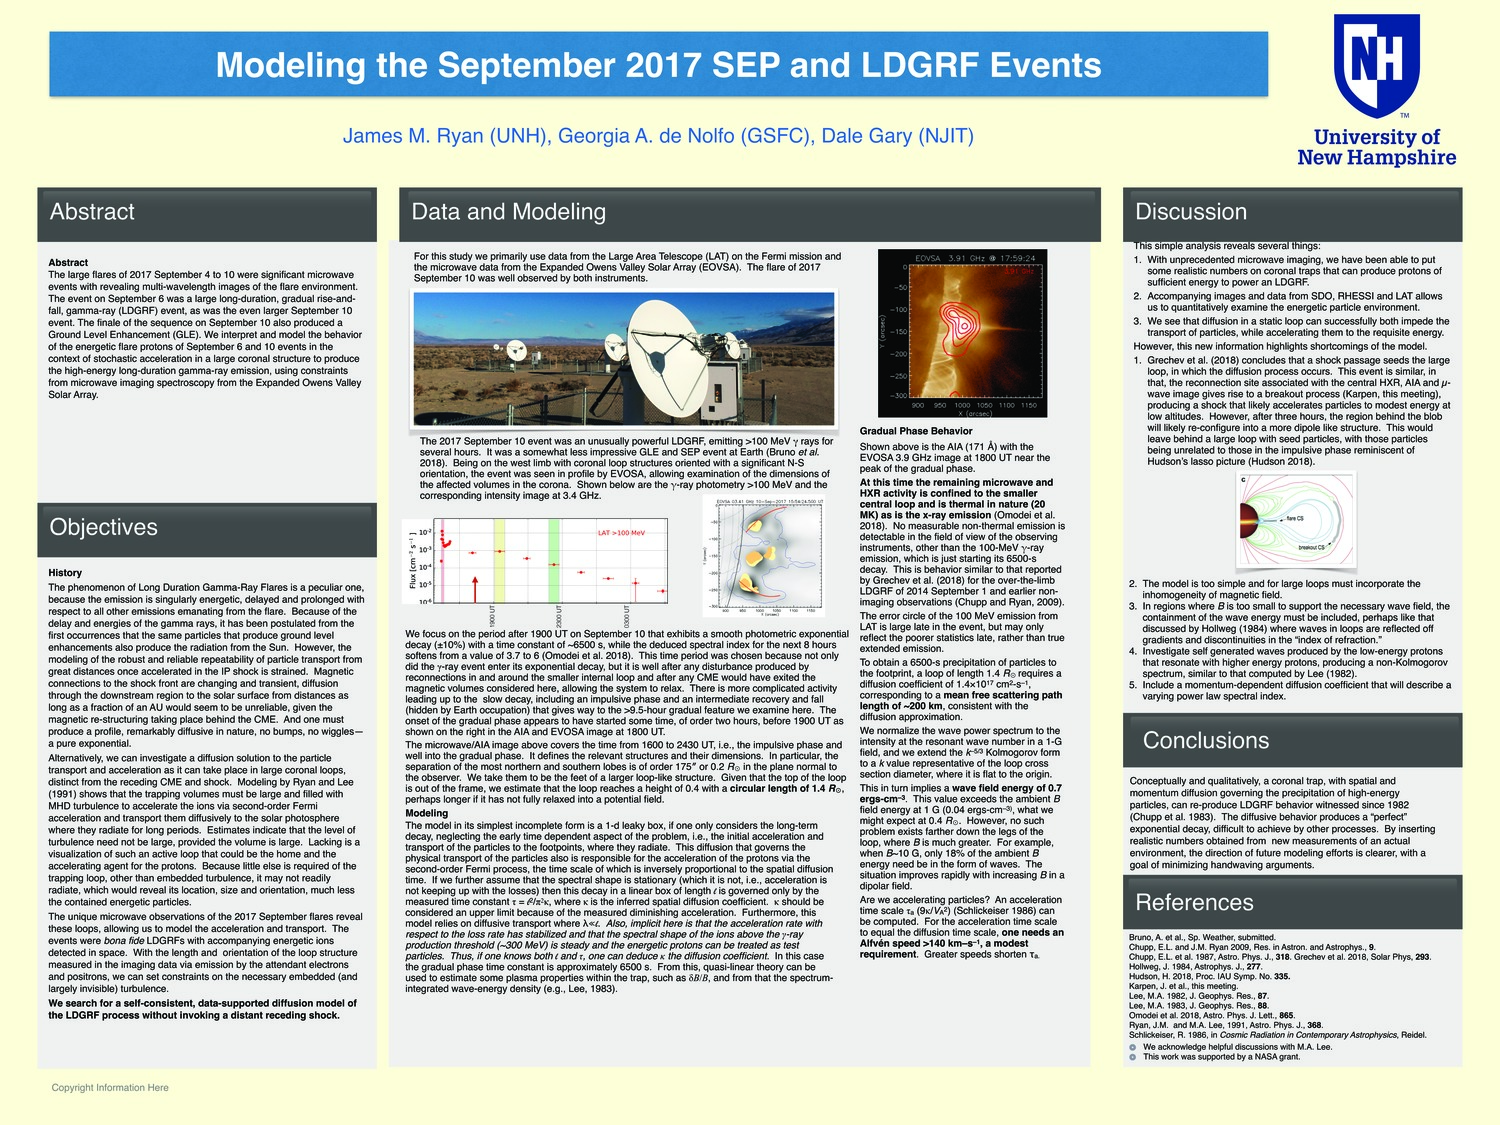 Modeling The September 2017 Sep And Ldgrf Events by jimunhryan